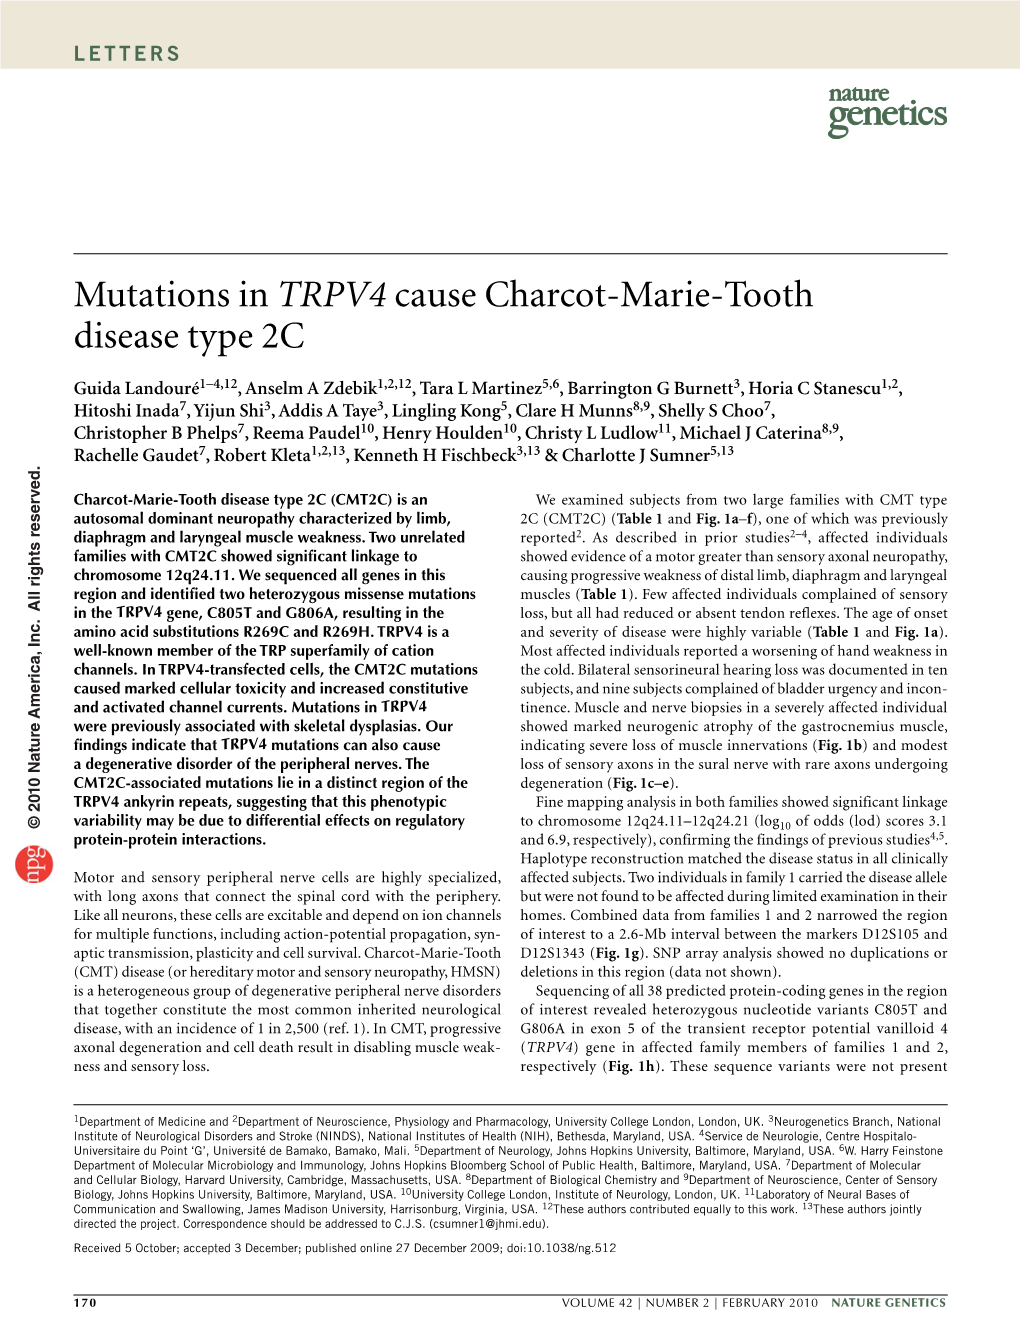 Mutations in TRPV4 Cause Charcot-Marie-Tooth Disease Type 2C